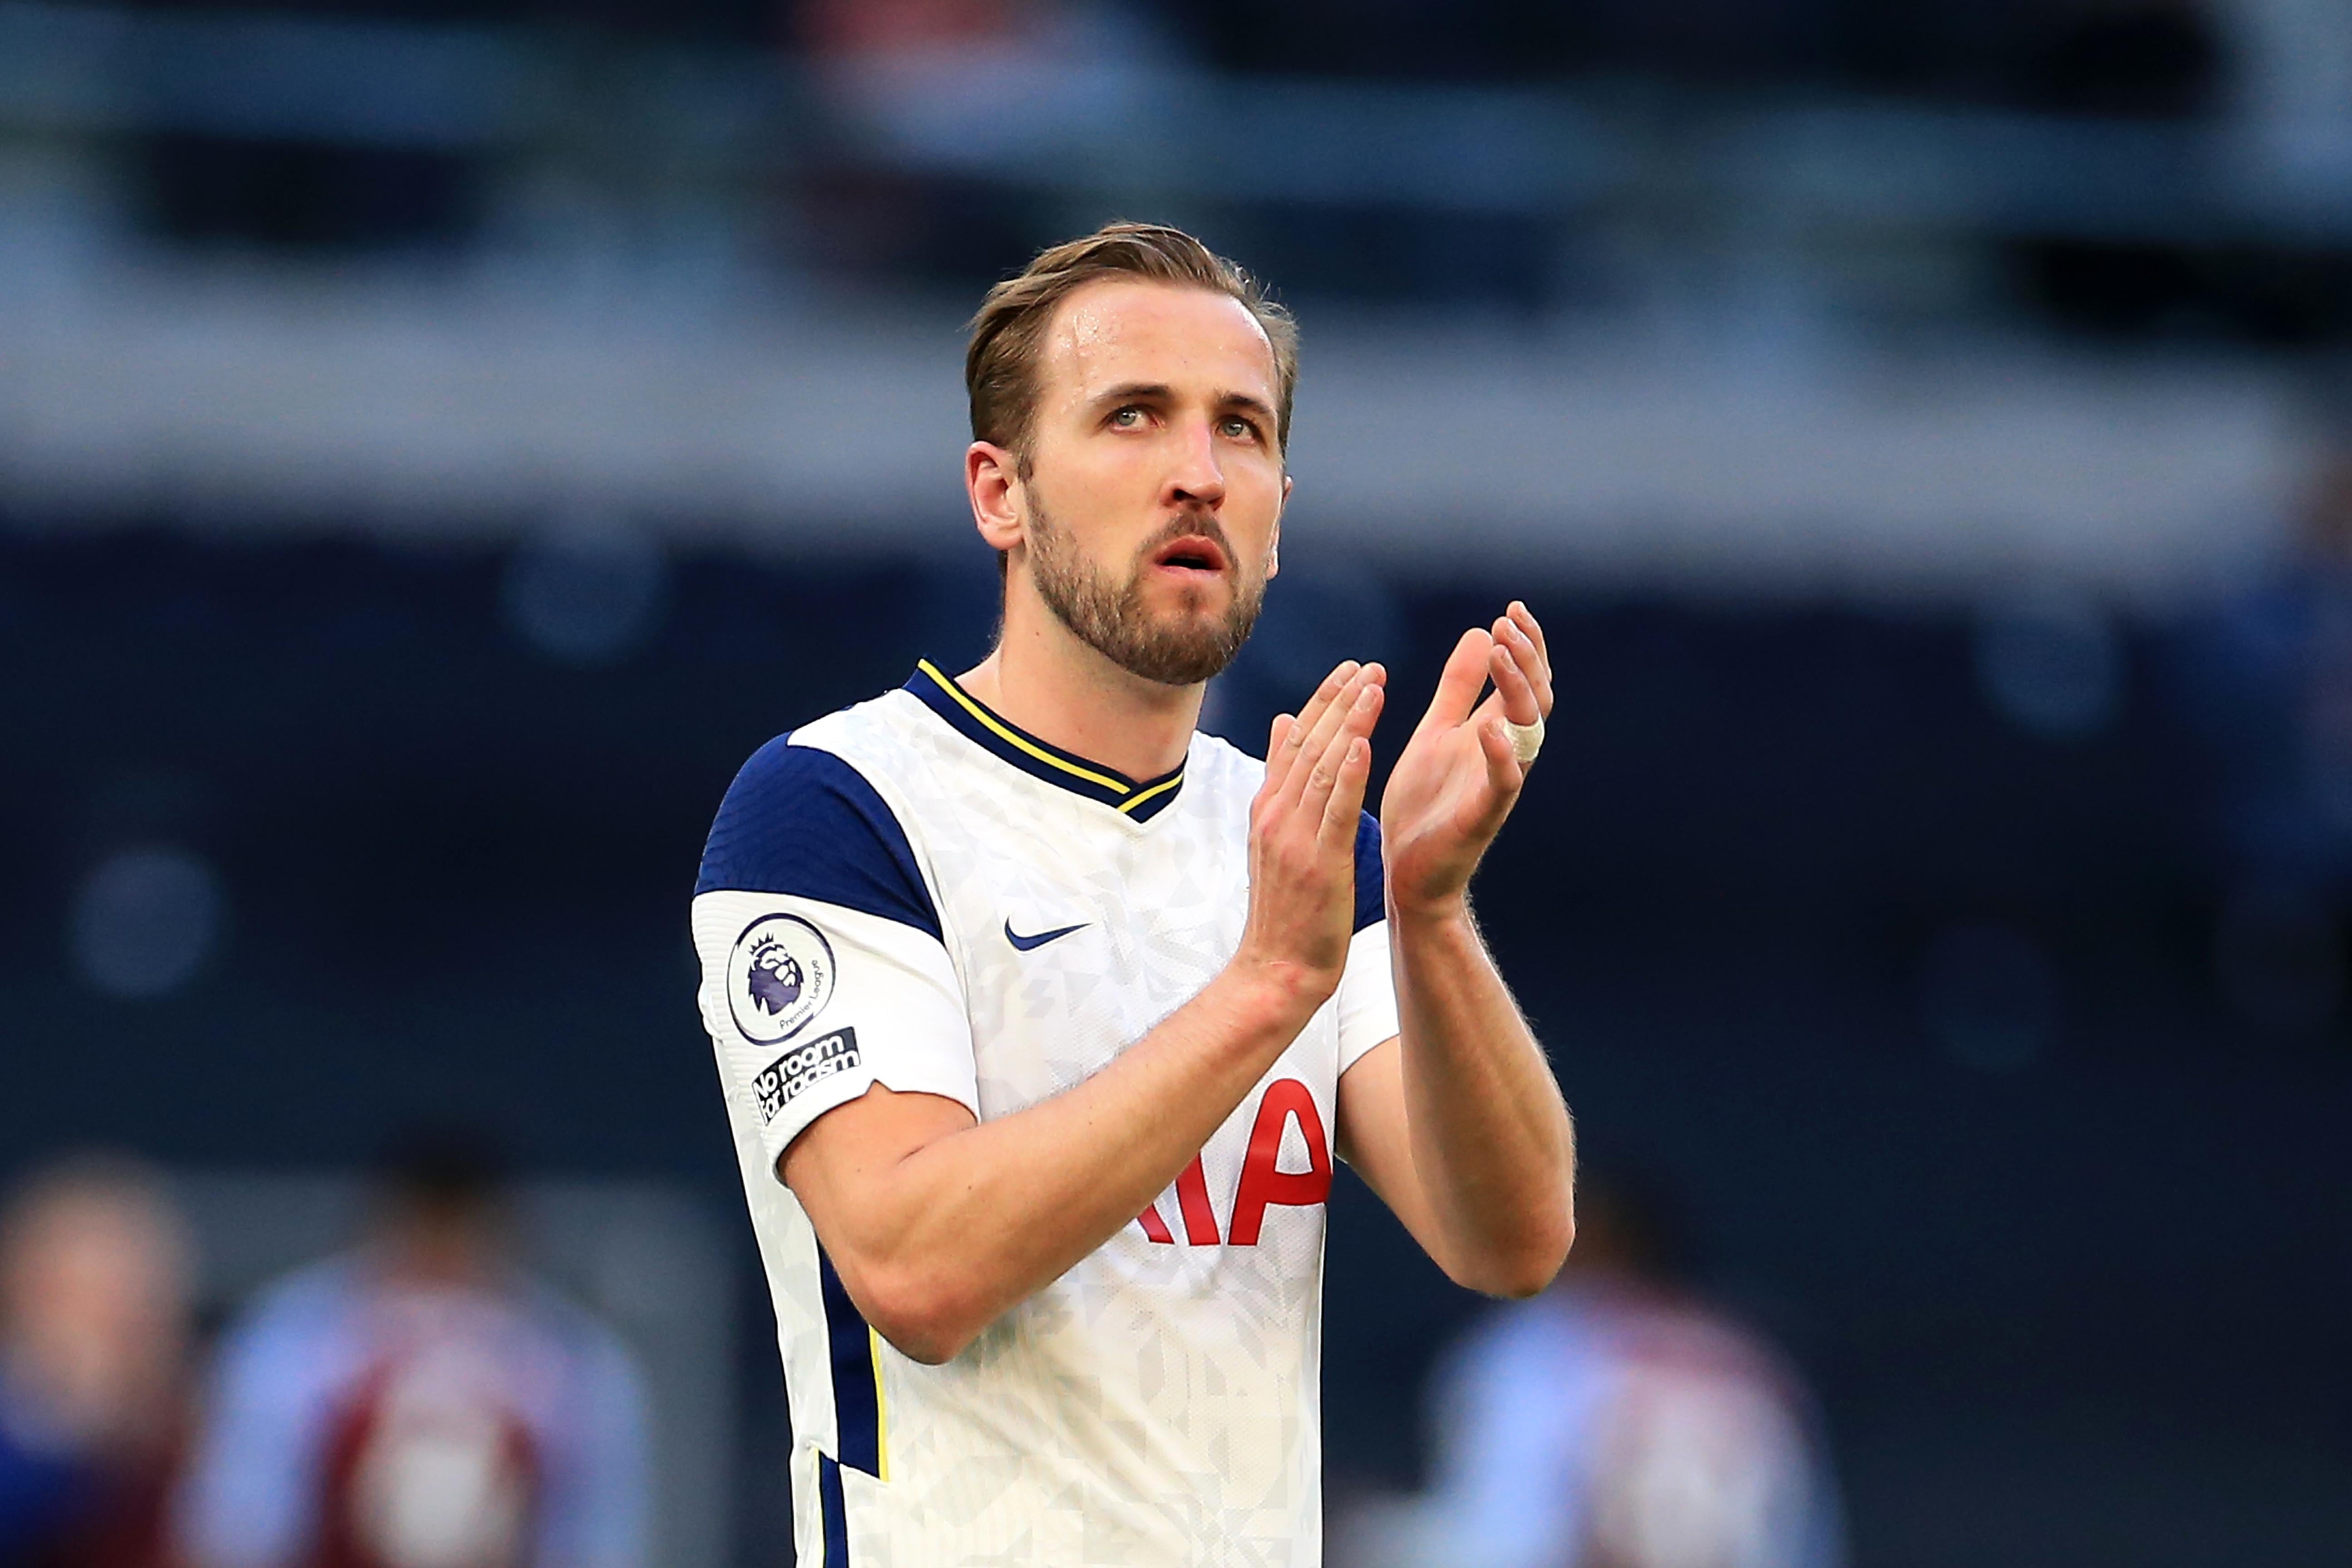 Harry Kane applauded the Tottenham fans following the final home game of the season